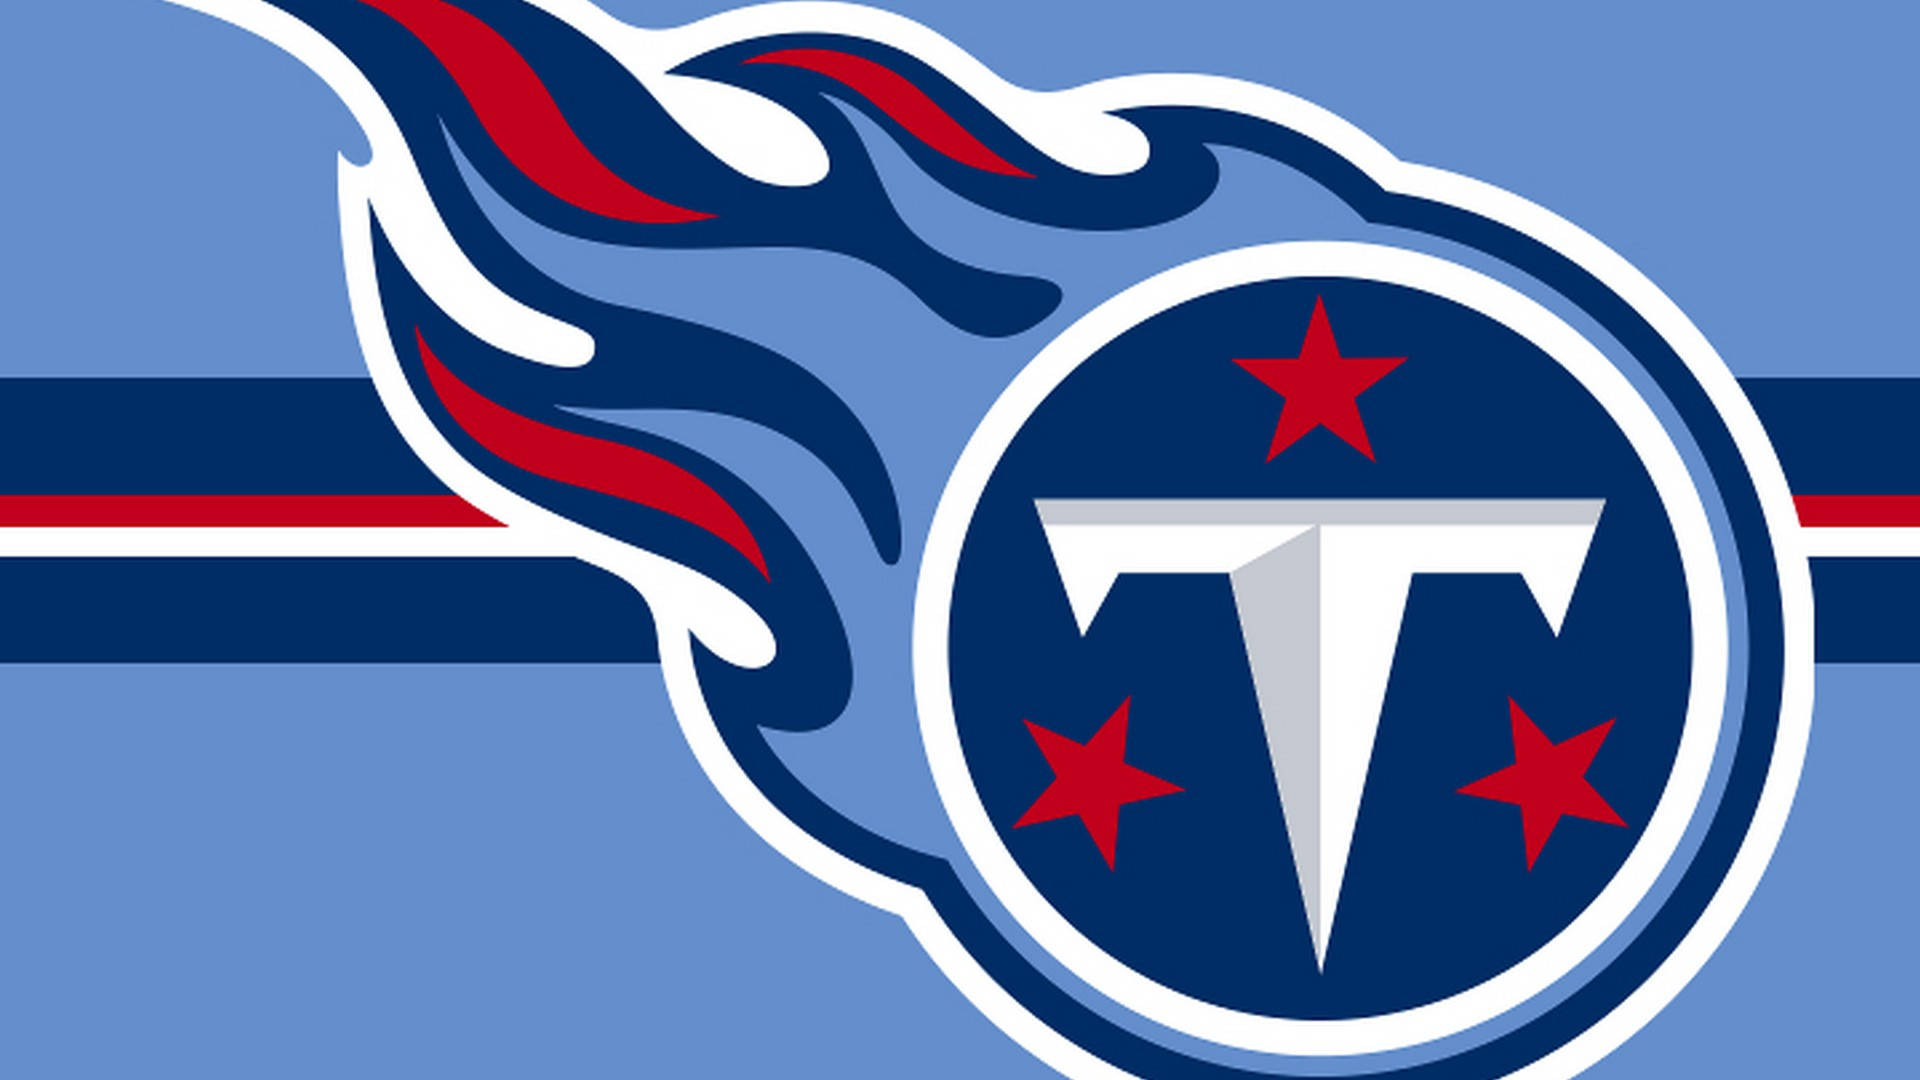 1920X1080 Tennessee Titans Wallpaper and Background